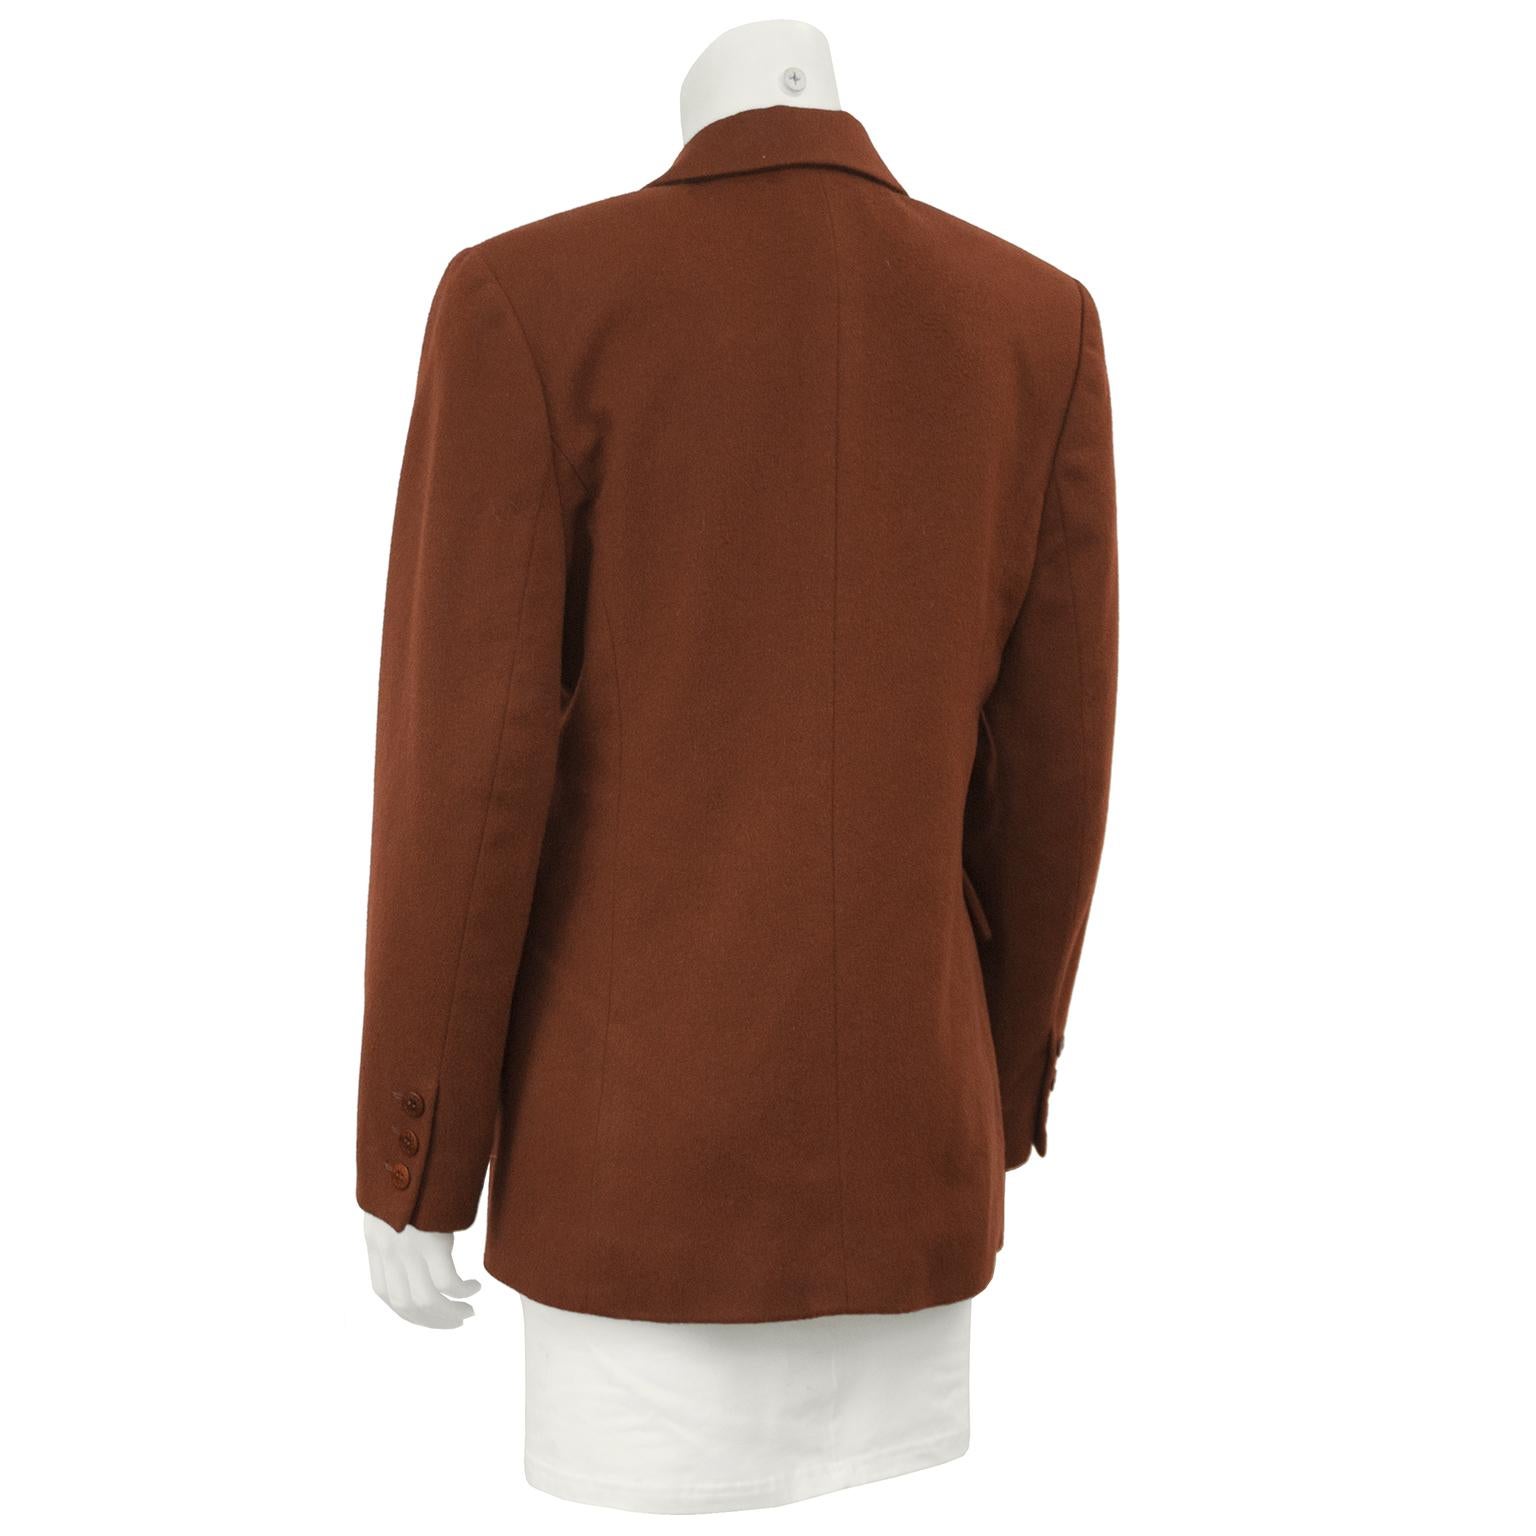 1990's rust colored cashmere Hermes jacket. Stunning classic double breasted shape with one breast pocket and two flap pockets on hip, all buttons original with Hermes Paris etched logo. Slightly fitted through the waist. Fully lined in rust and red